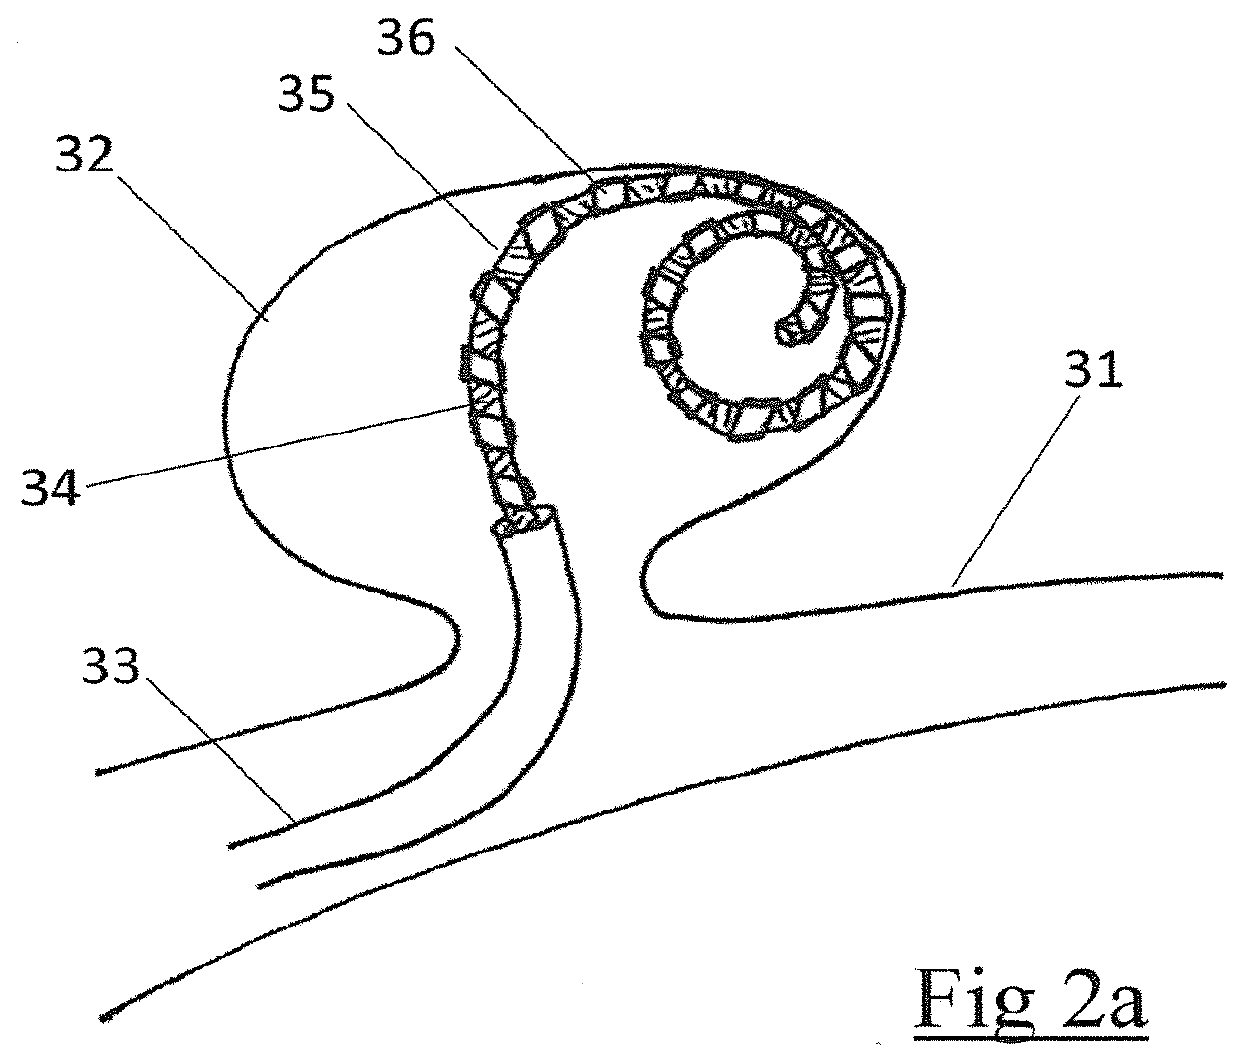 DEVICE AND METHOD FOR ENDOVASCULAR TREATMENT OF ANEURYSMS USING EMBOLIC ePTFE